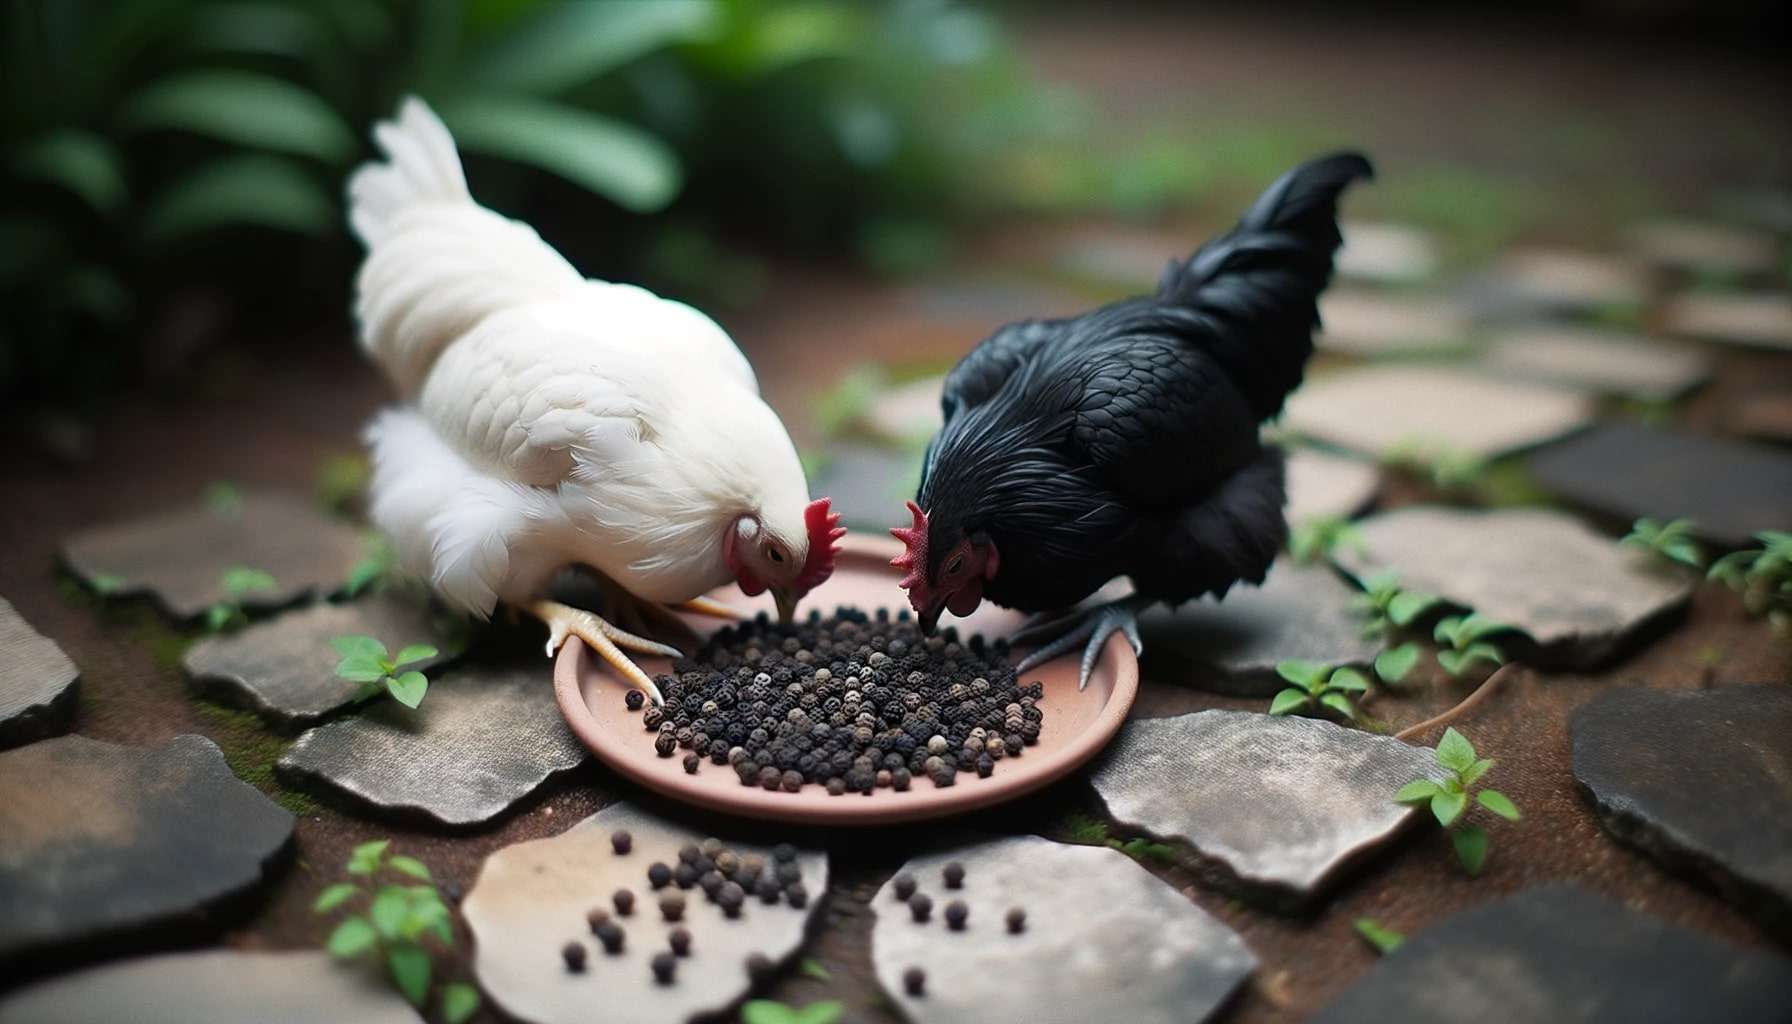 White and black chickens peck at black peppers on plate; stone path surrounded by greenery.